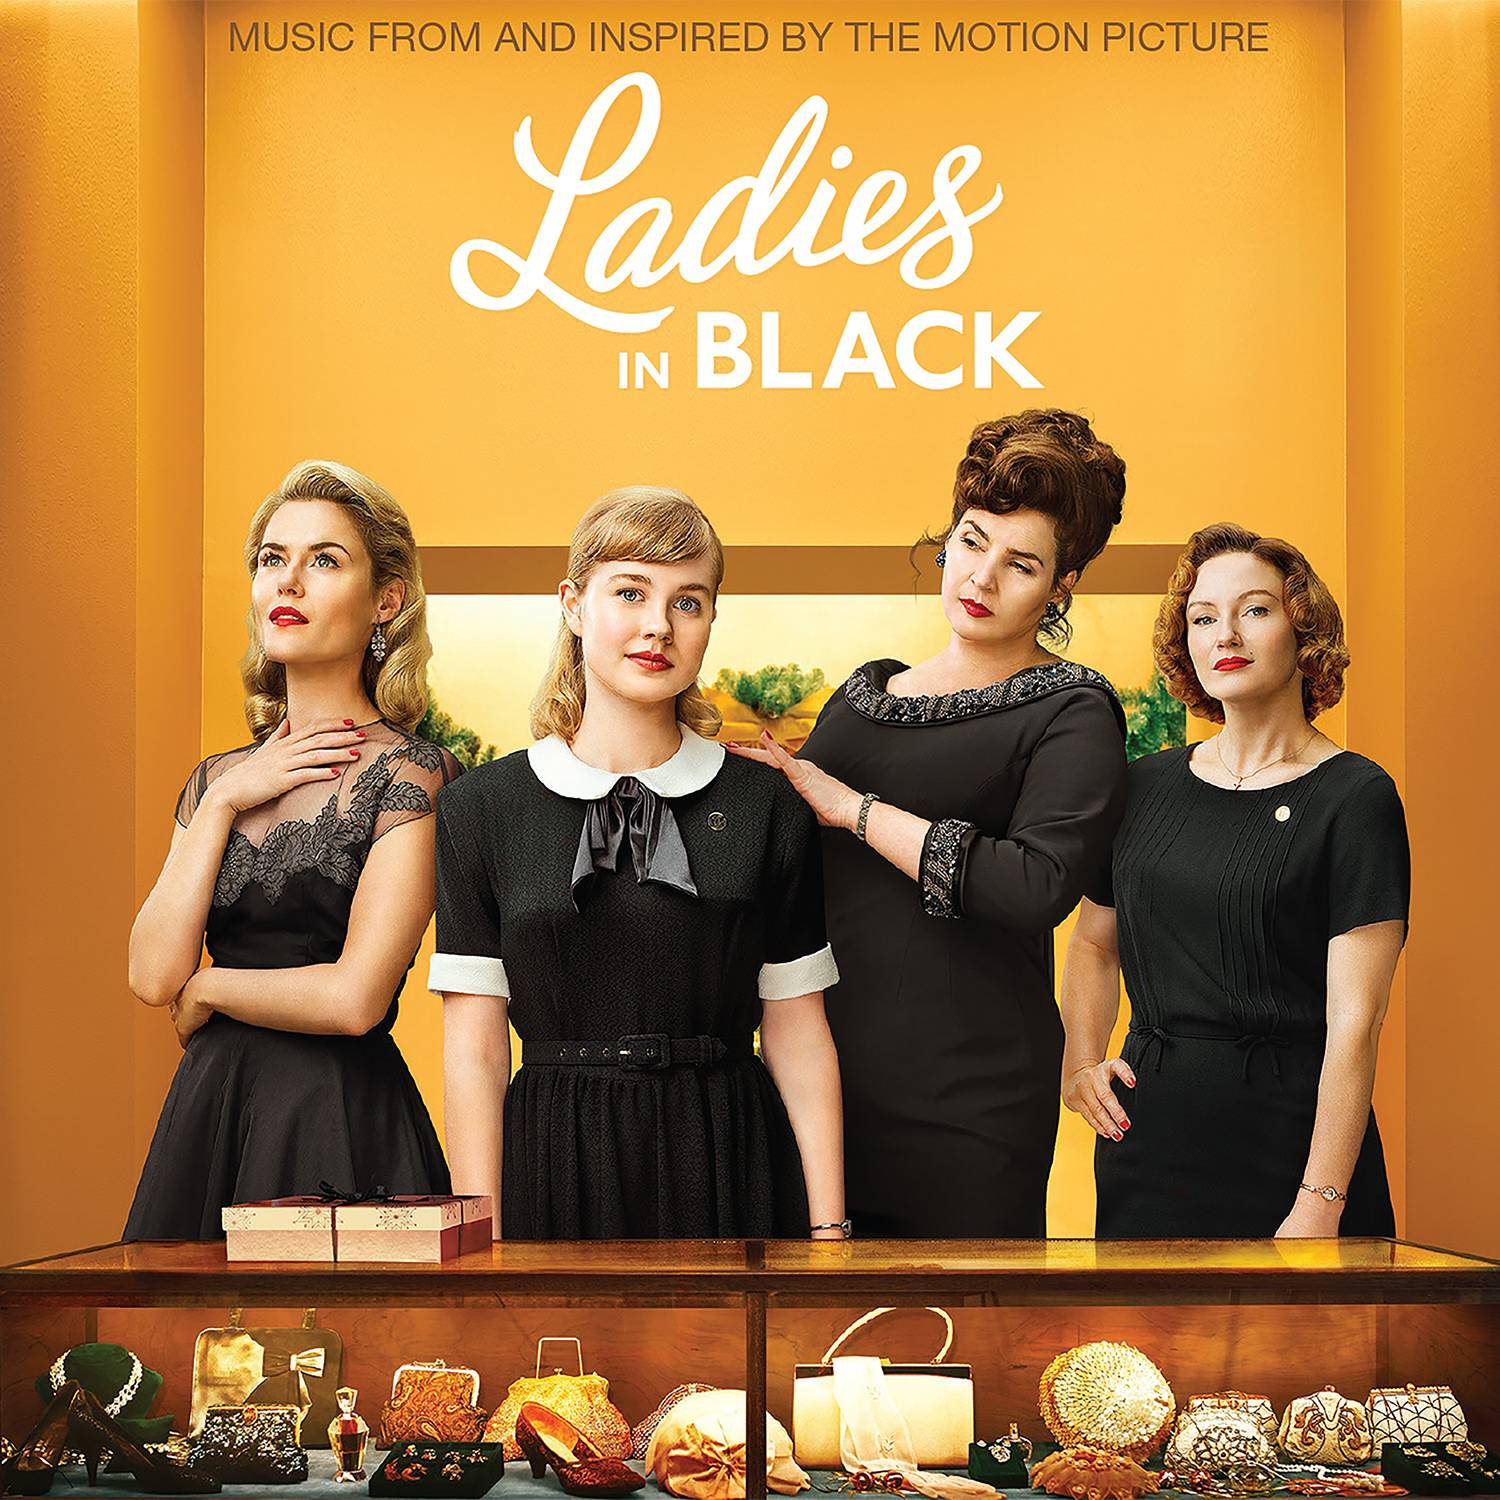 Music Inspired By the Movie "Ladies In Black"